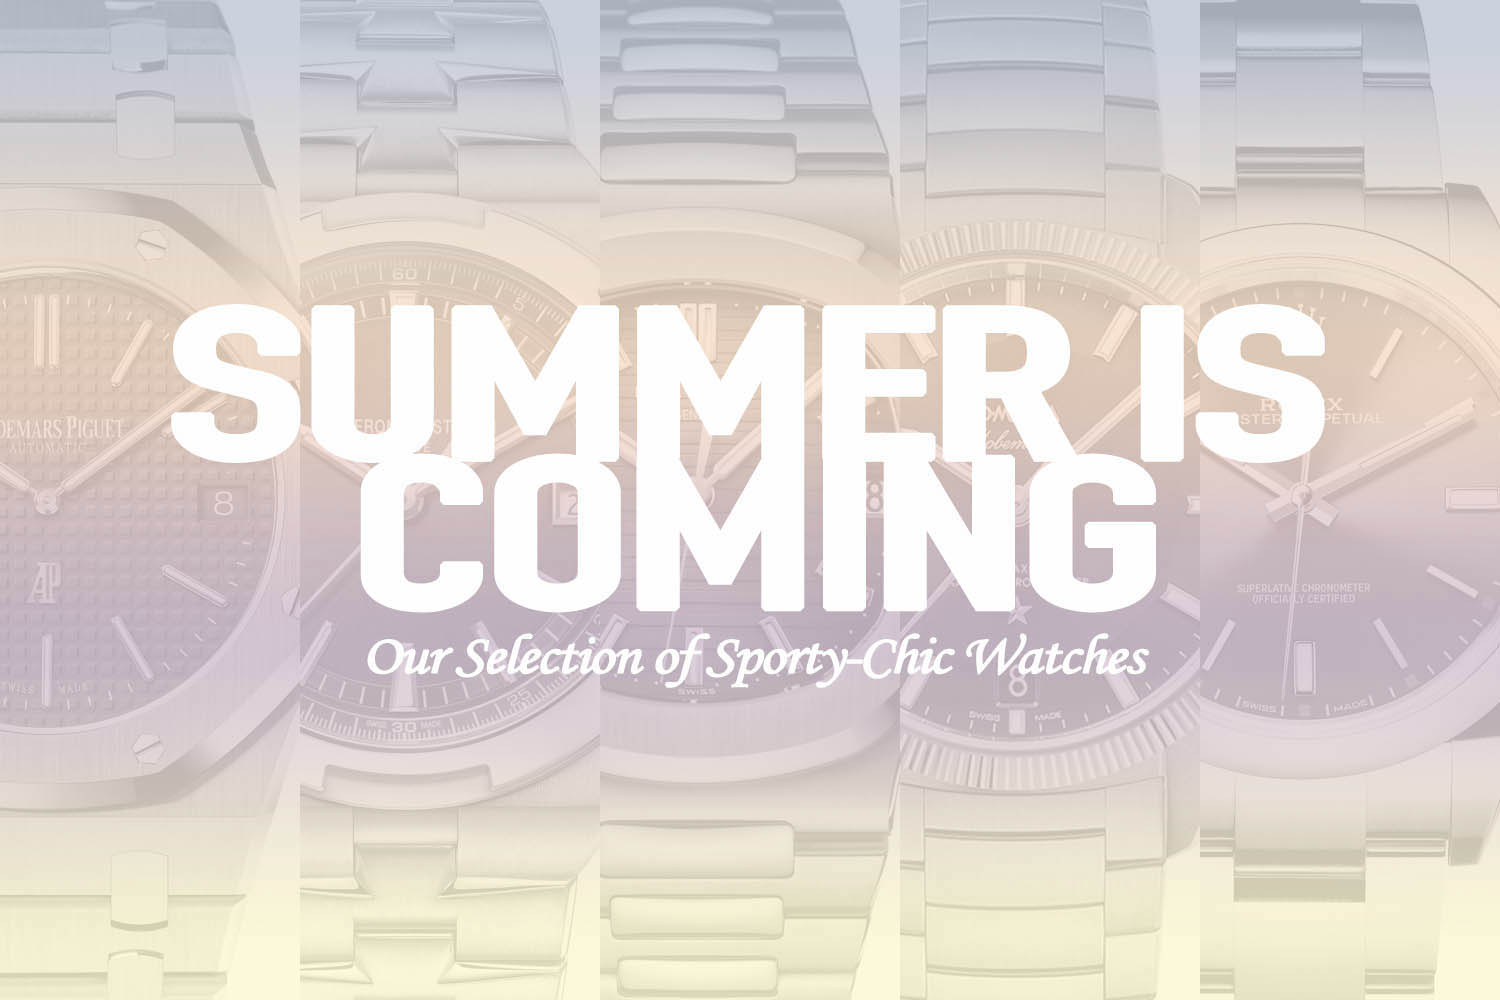 Sports-chic watches - Summer selection